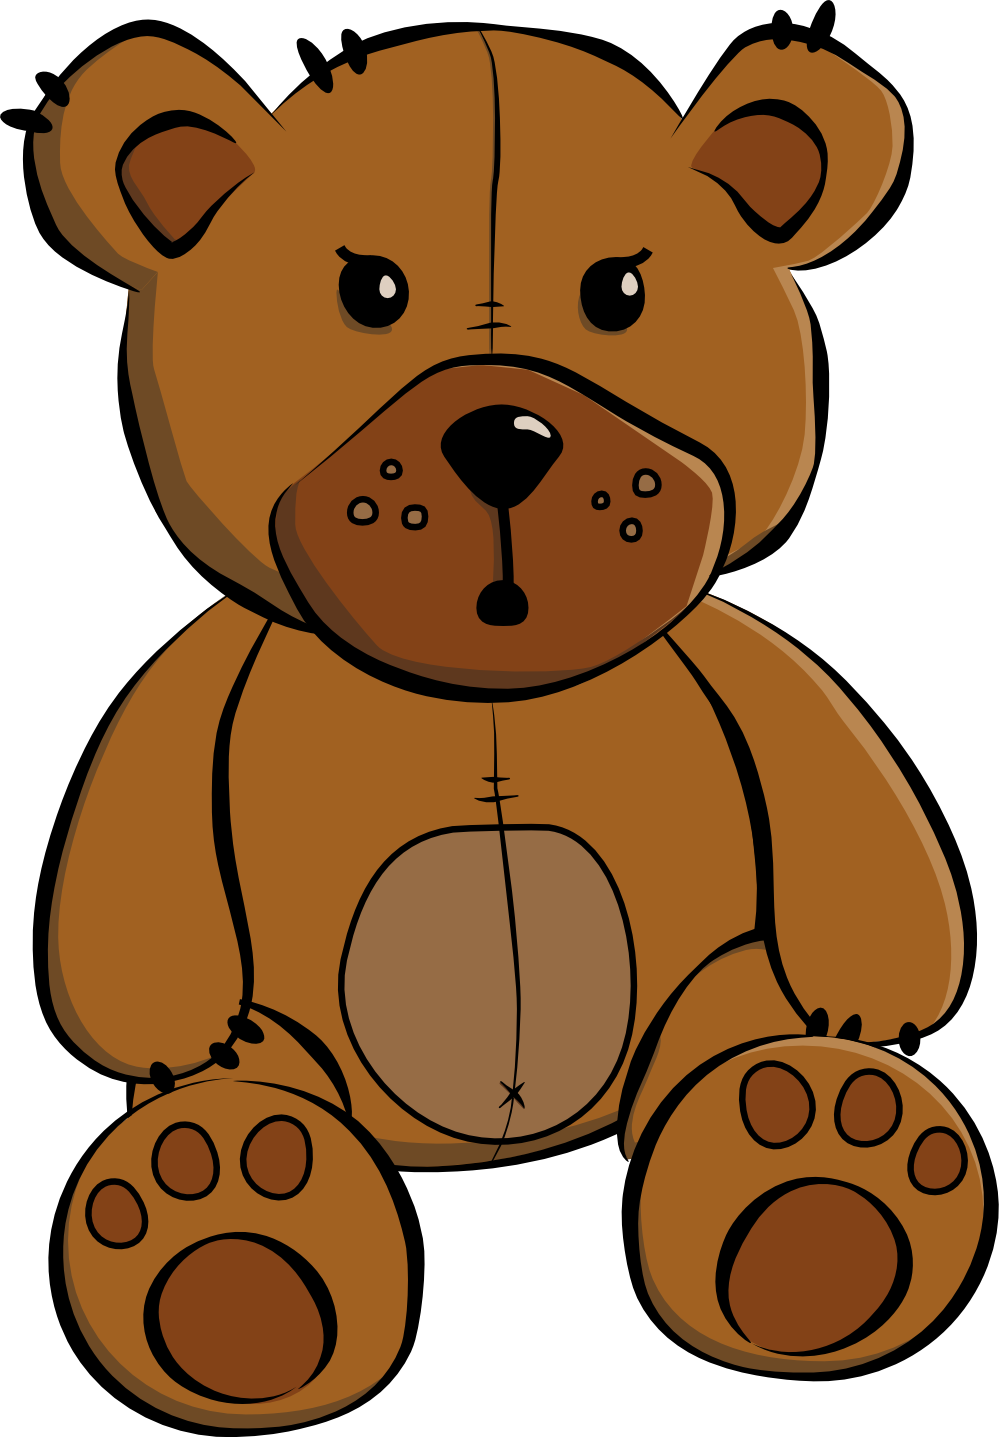 Free Outline Of A Teddy Bear Download Free Outline Of A Teddy Bear Png 